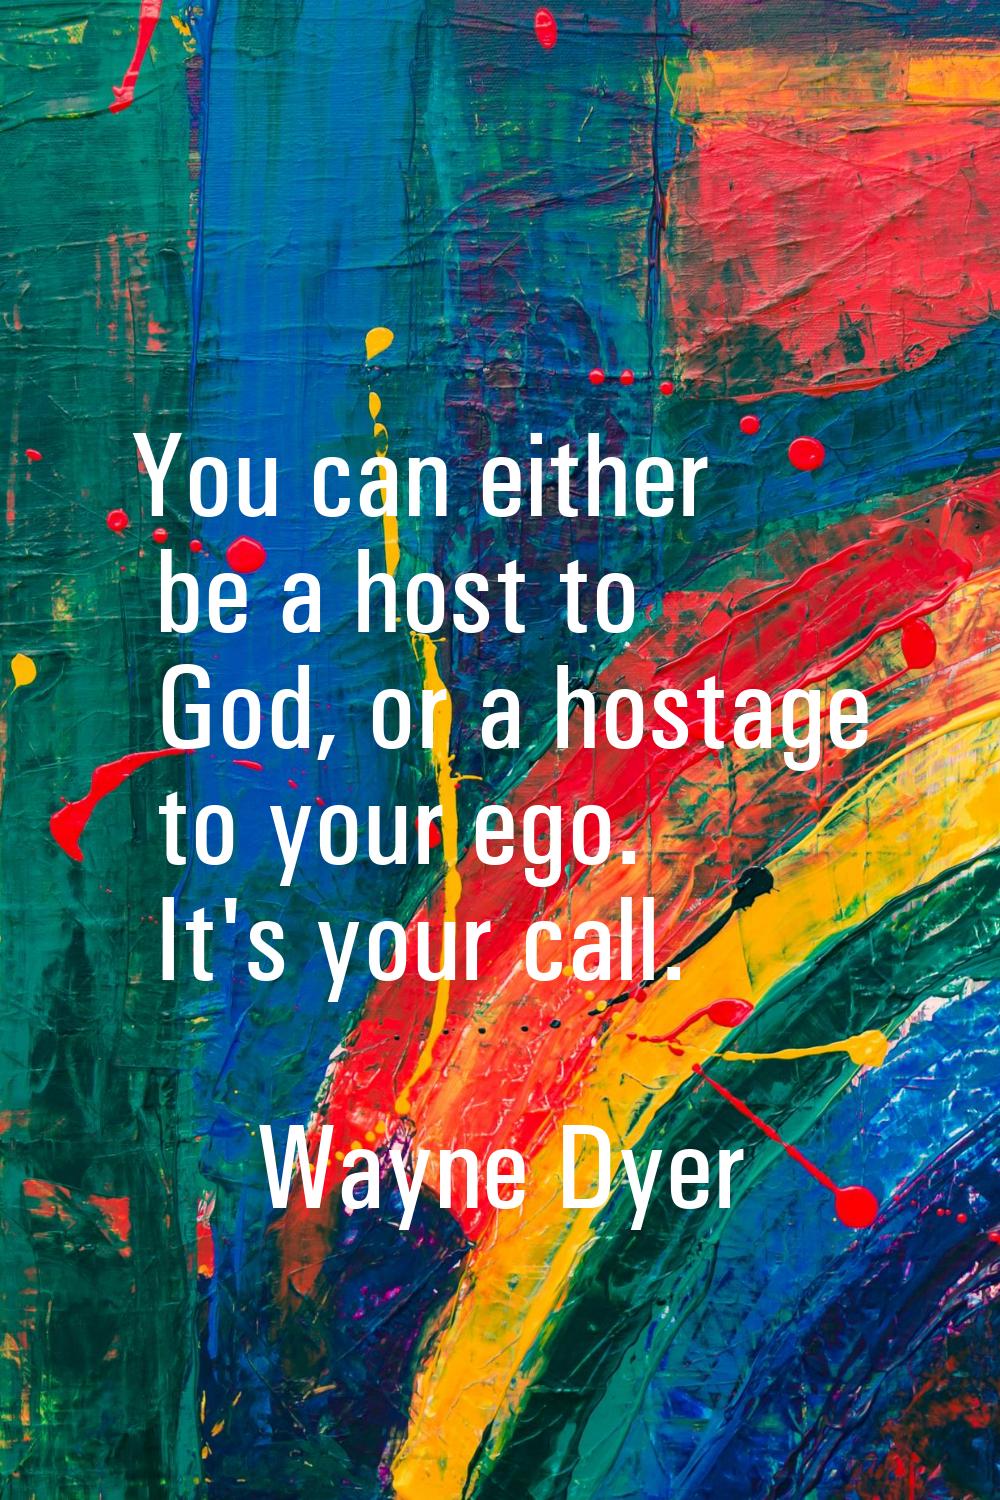 You can either be a host to God, or a hostage to your ego. It's your call.